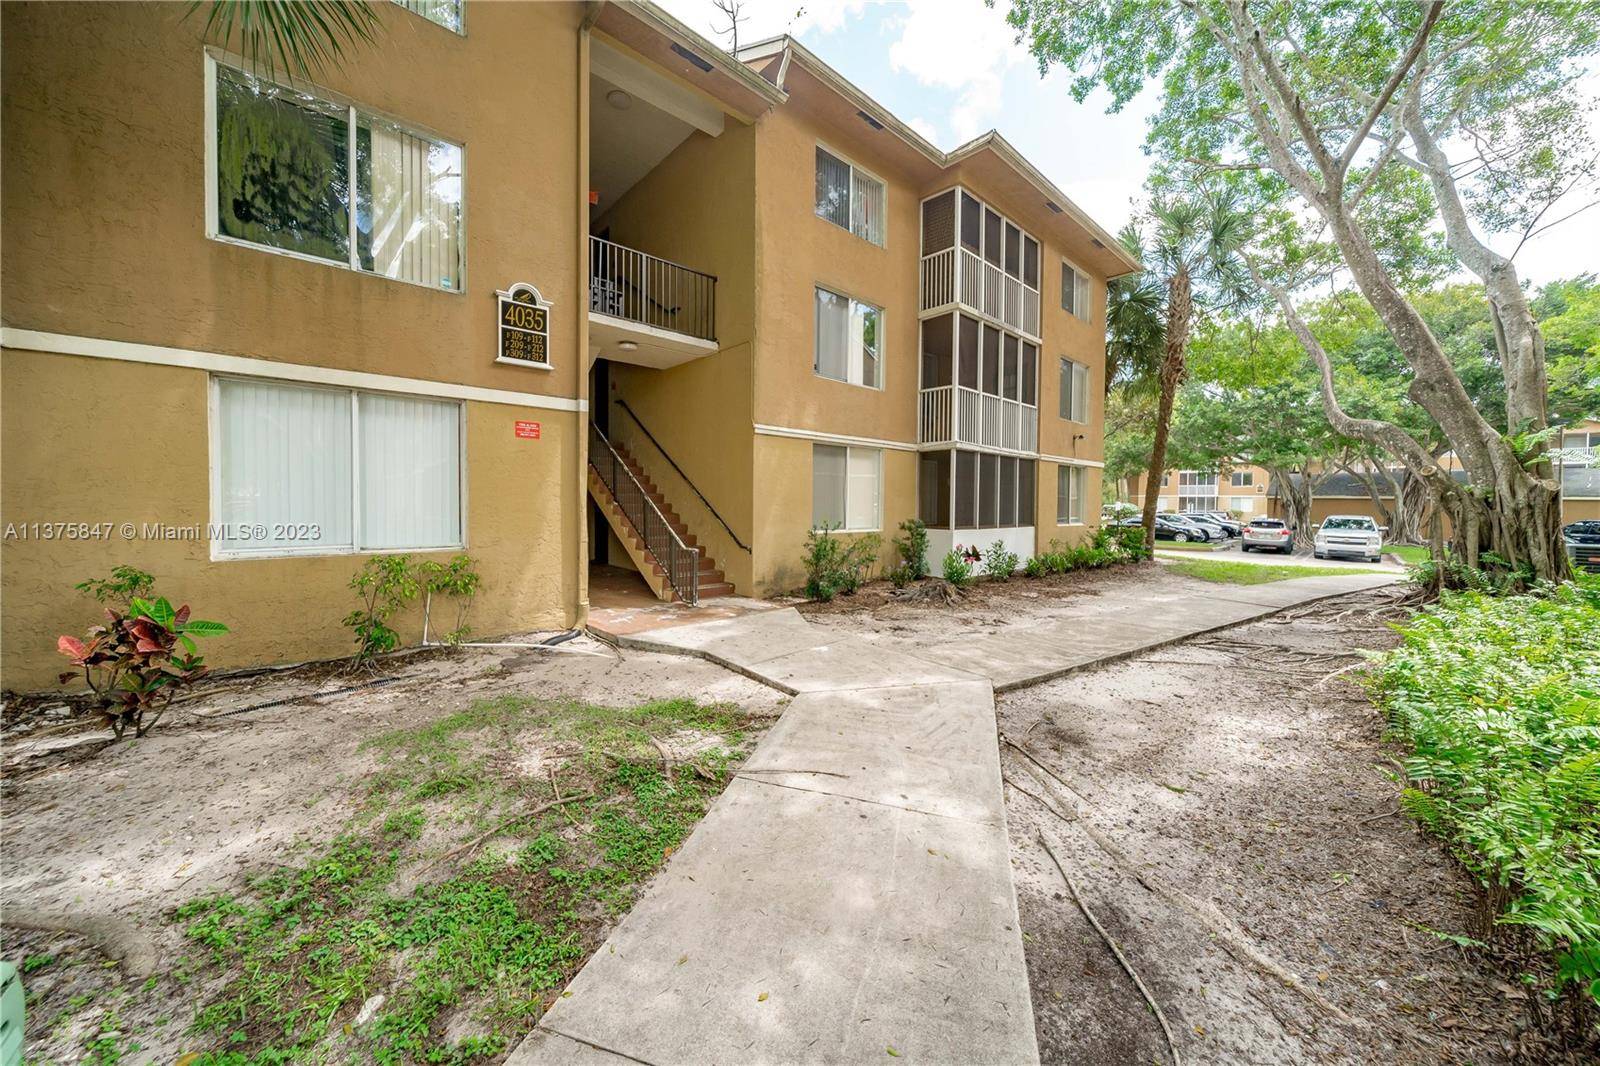 All ages are welcome ! This totally remodeled spacious 3 bedroom, 2 bath condo is located in the community of Windward Lakes.